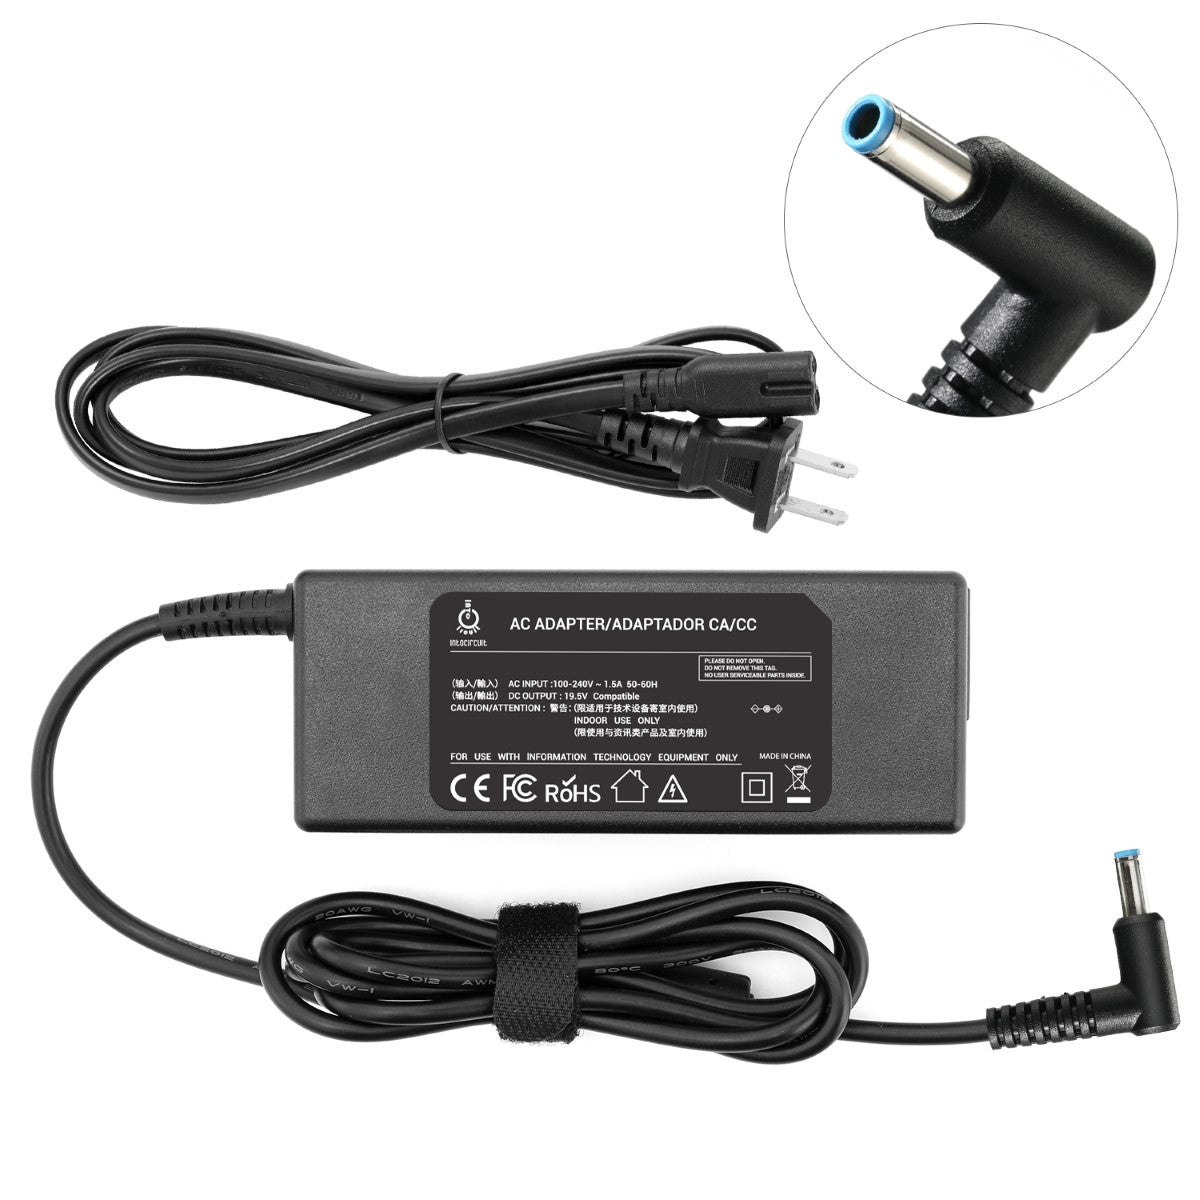 Charger for HP 15-g100 Laptop